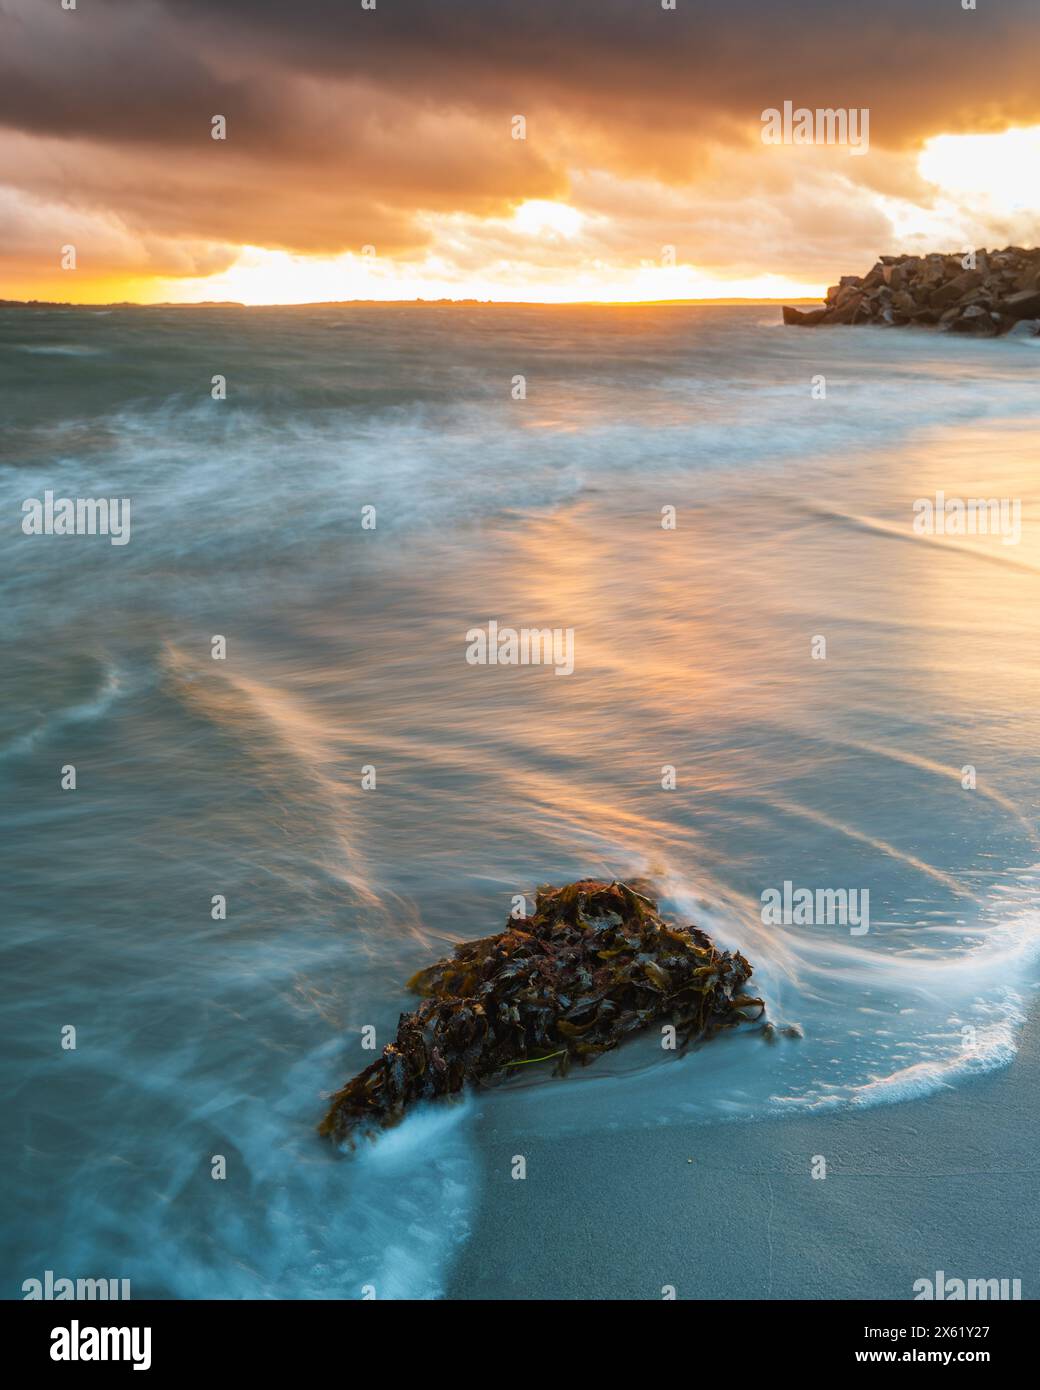 The sun dips toward the horizon, casting a warm glow over the shoreline in Sweden. Waves gently lap at the beach, swirling around clumps of seaweed as Stock Photo